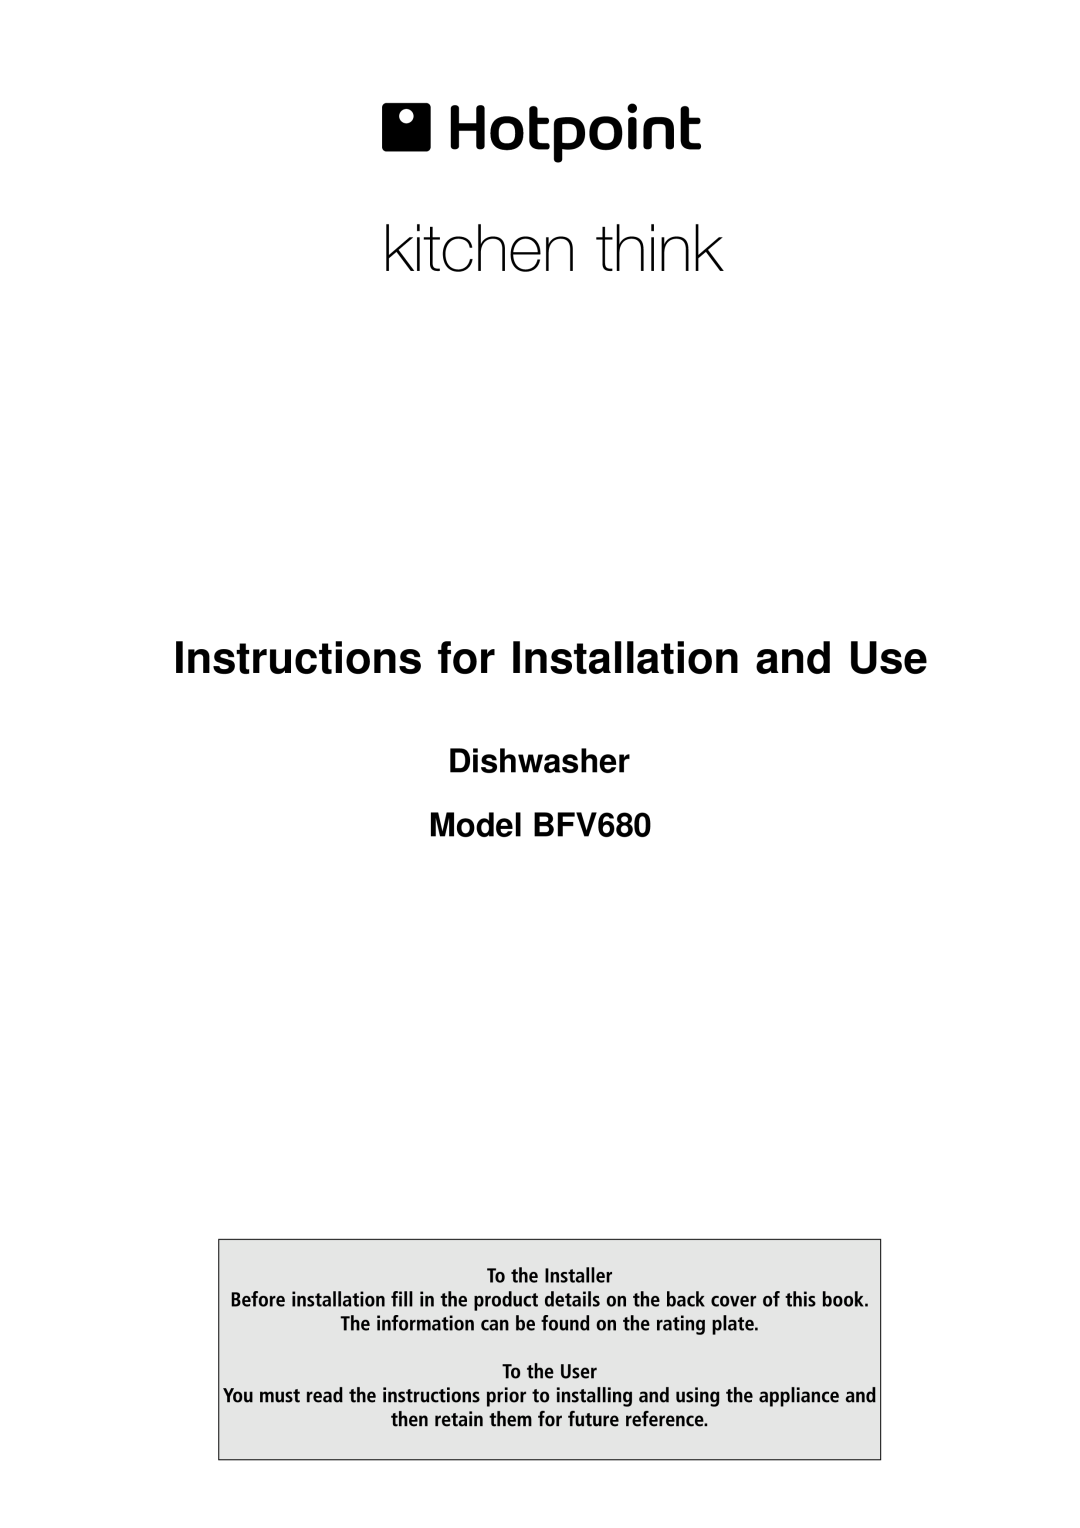 Hotpoint manual Instructions for Installation and Use, Dishwasher Model BFV680 